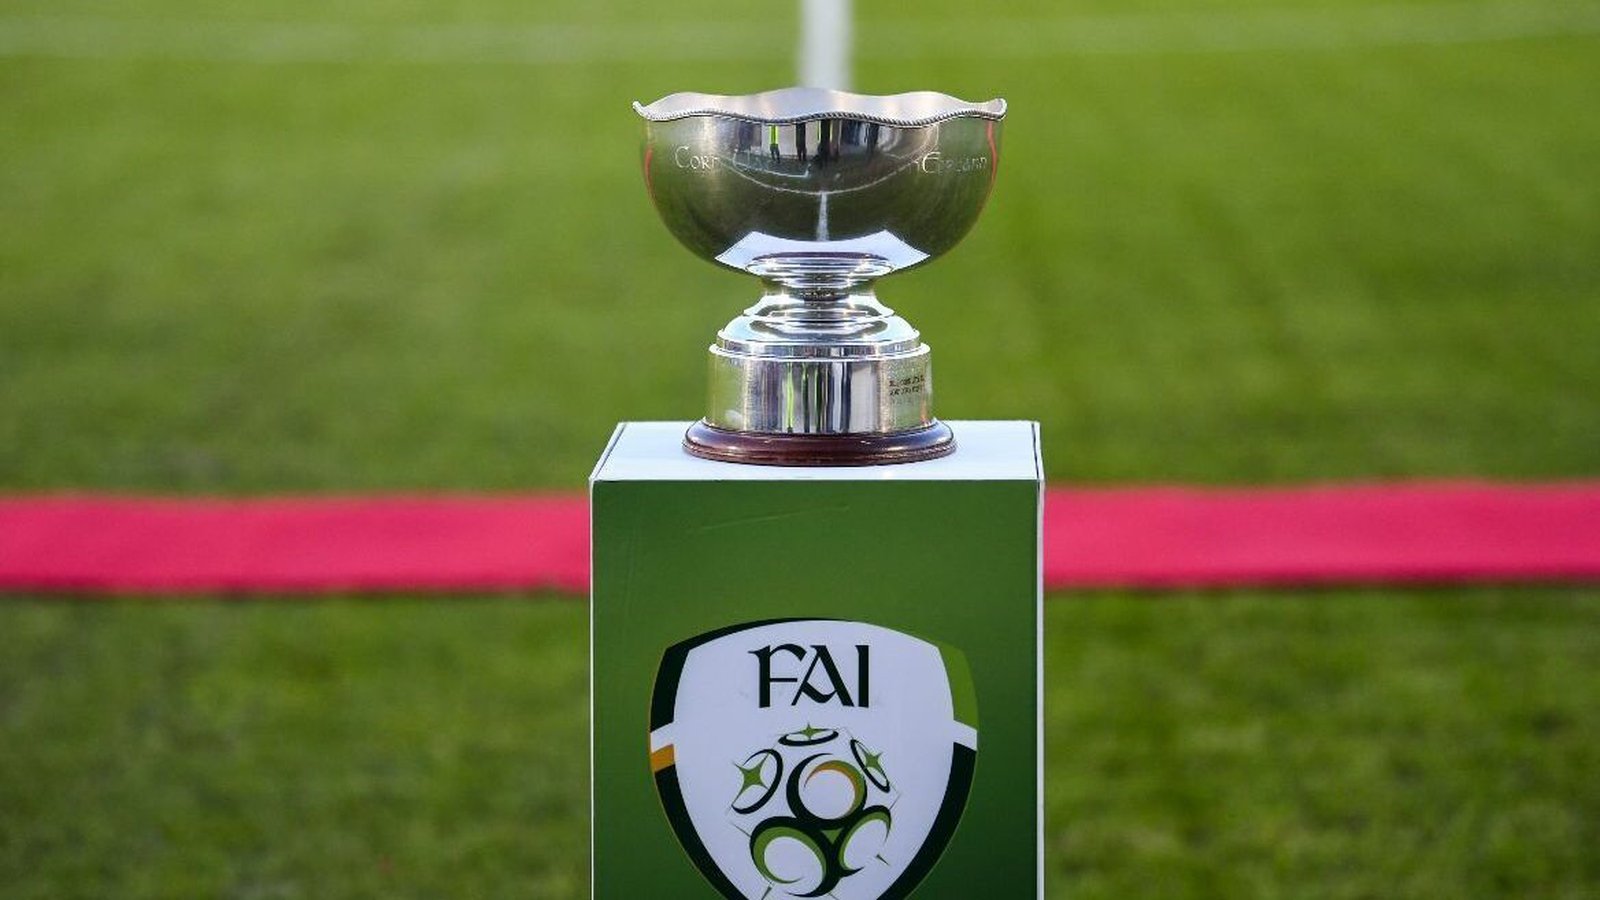 President's Cup final set for Tallaght on 12 March